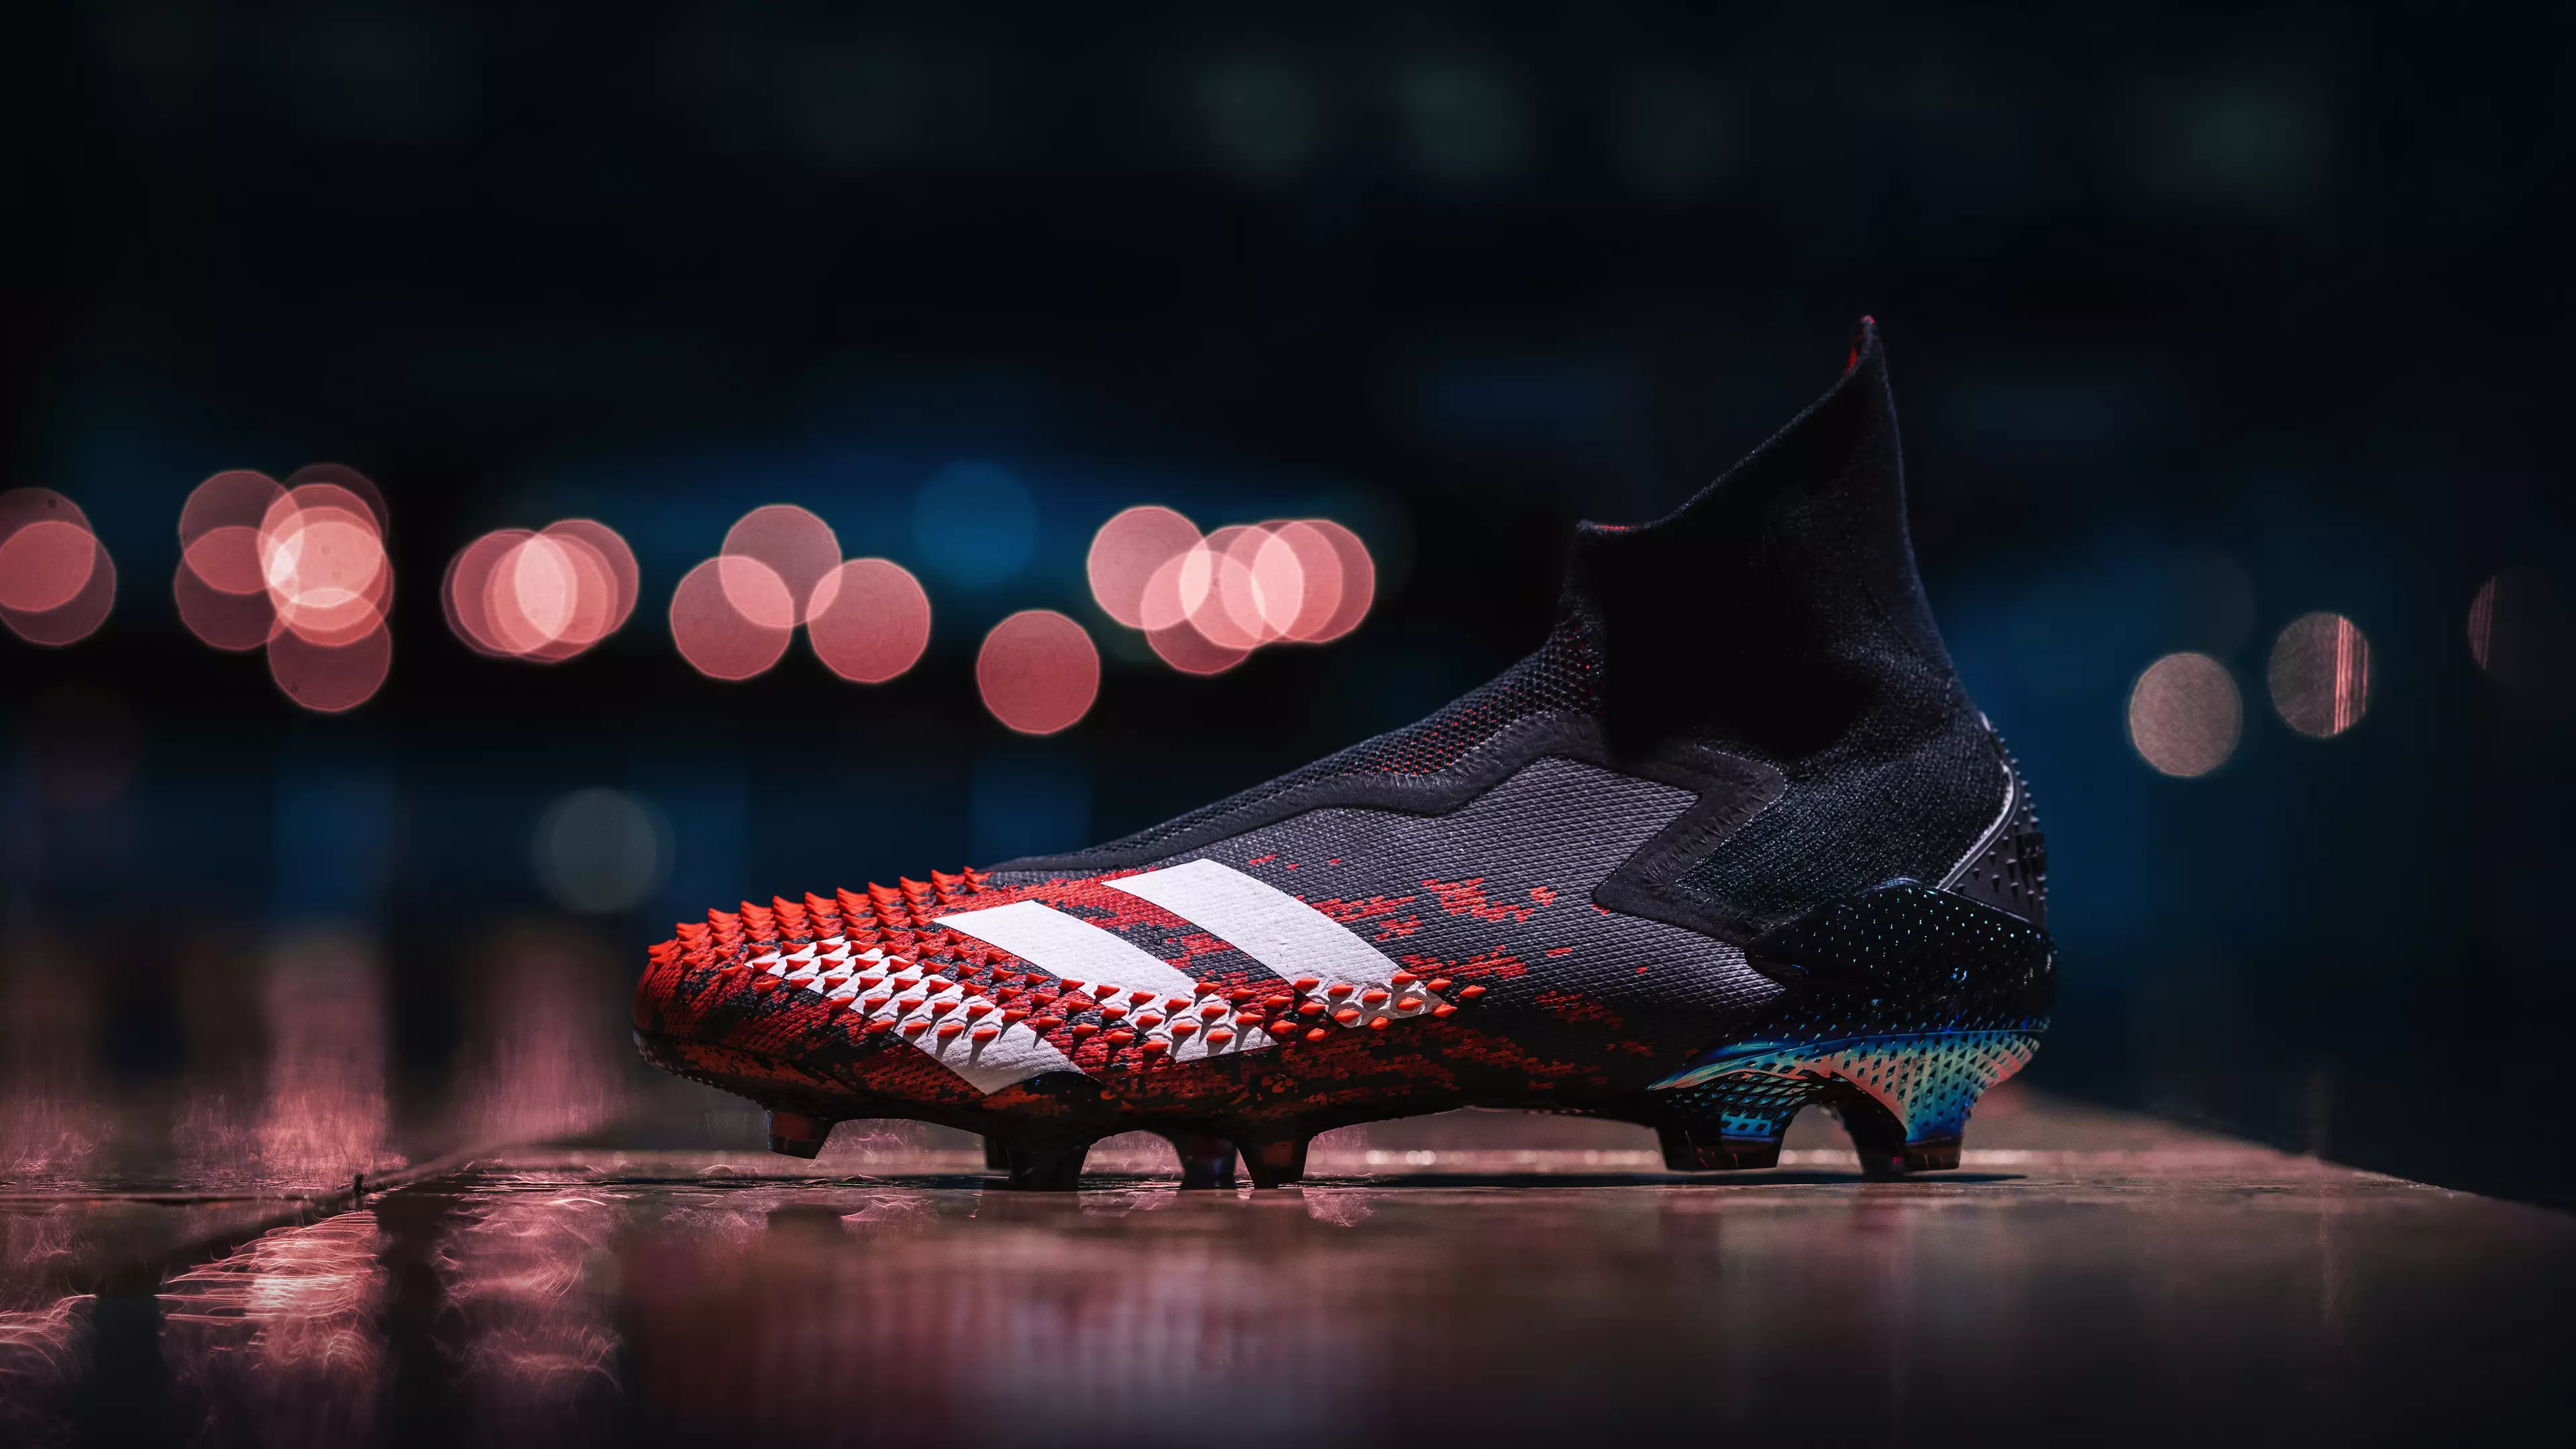 Adidas unveiled a new version of their iconic Predator boots - the Mutator